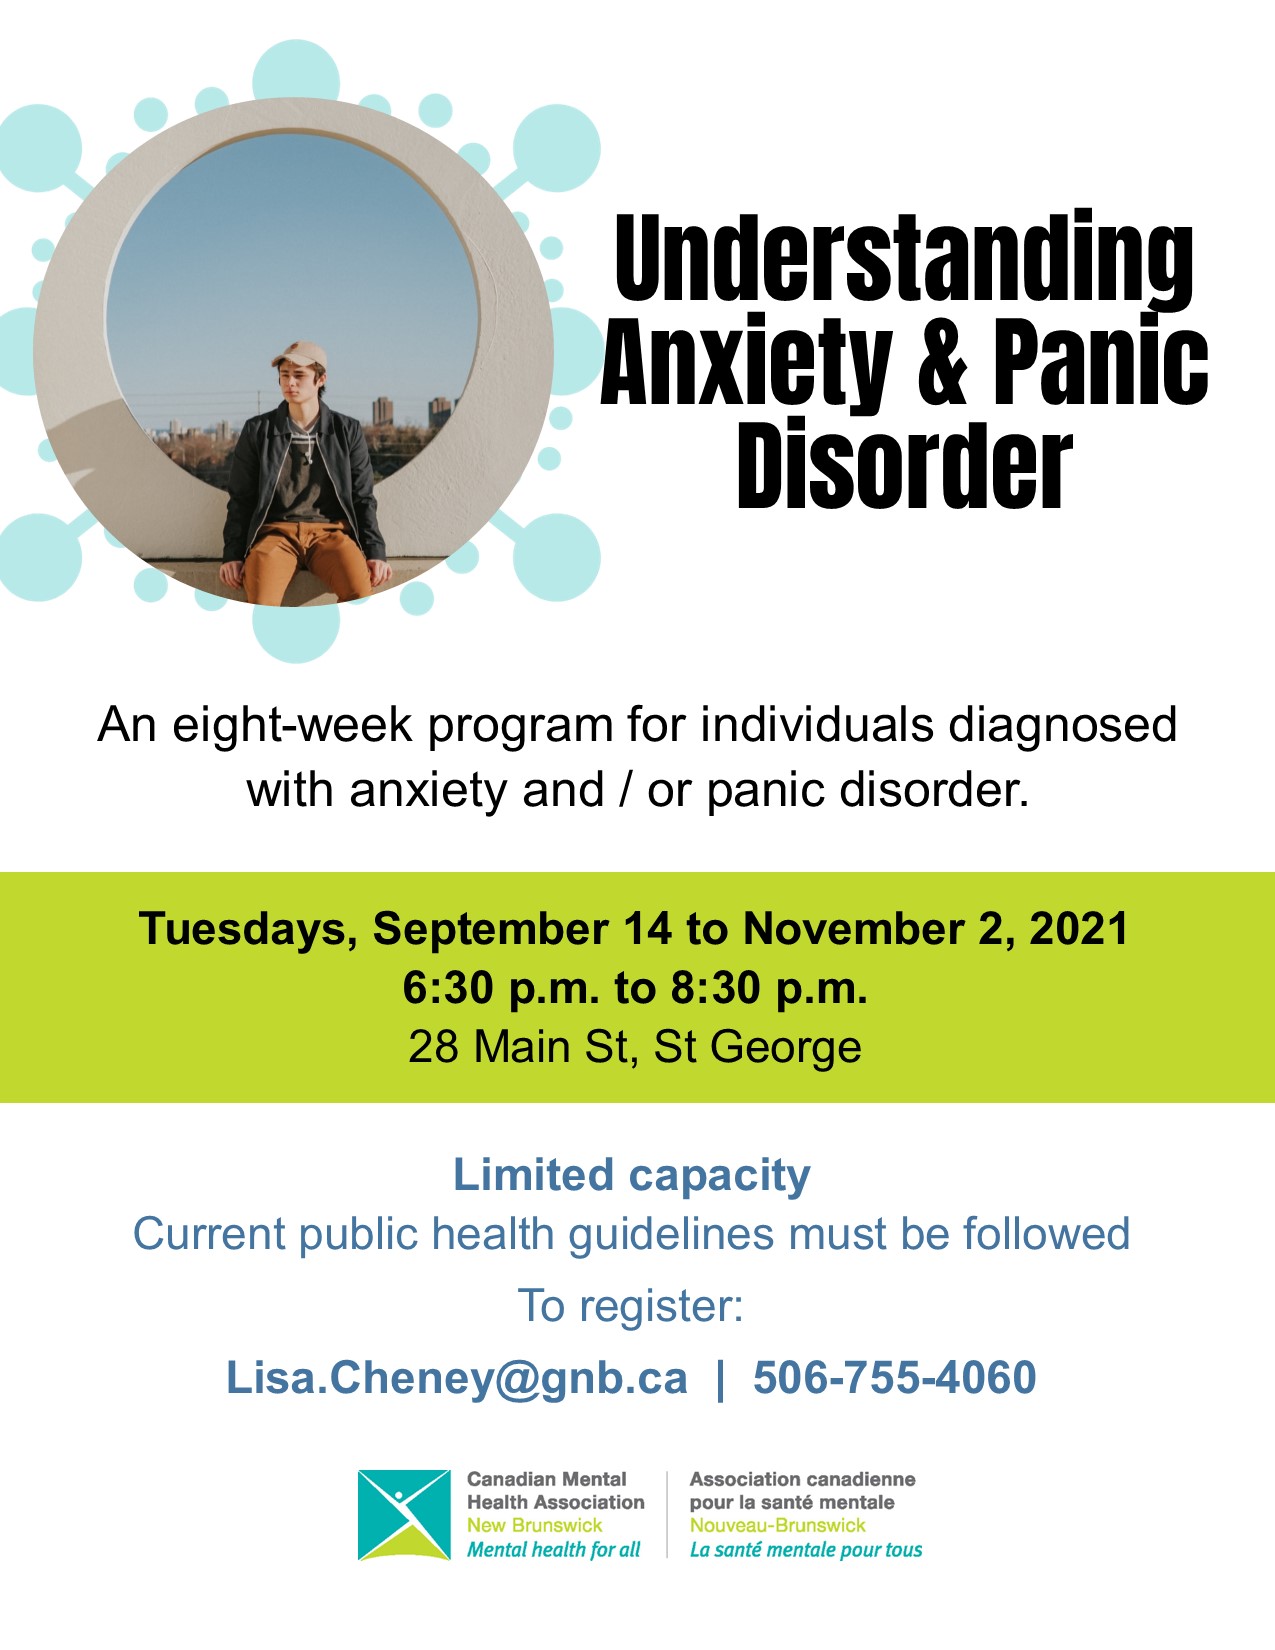 Understanding Anxiety & Panic Disorder (St George)